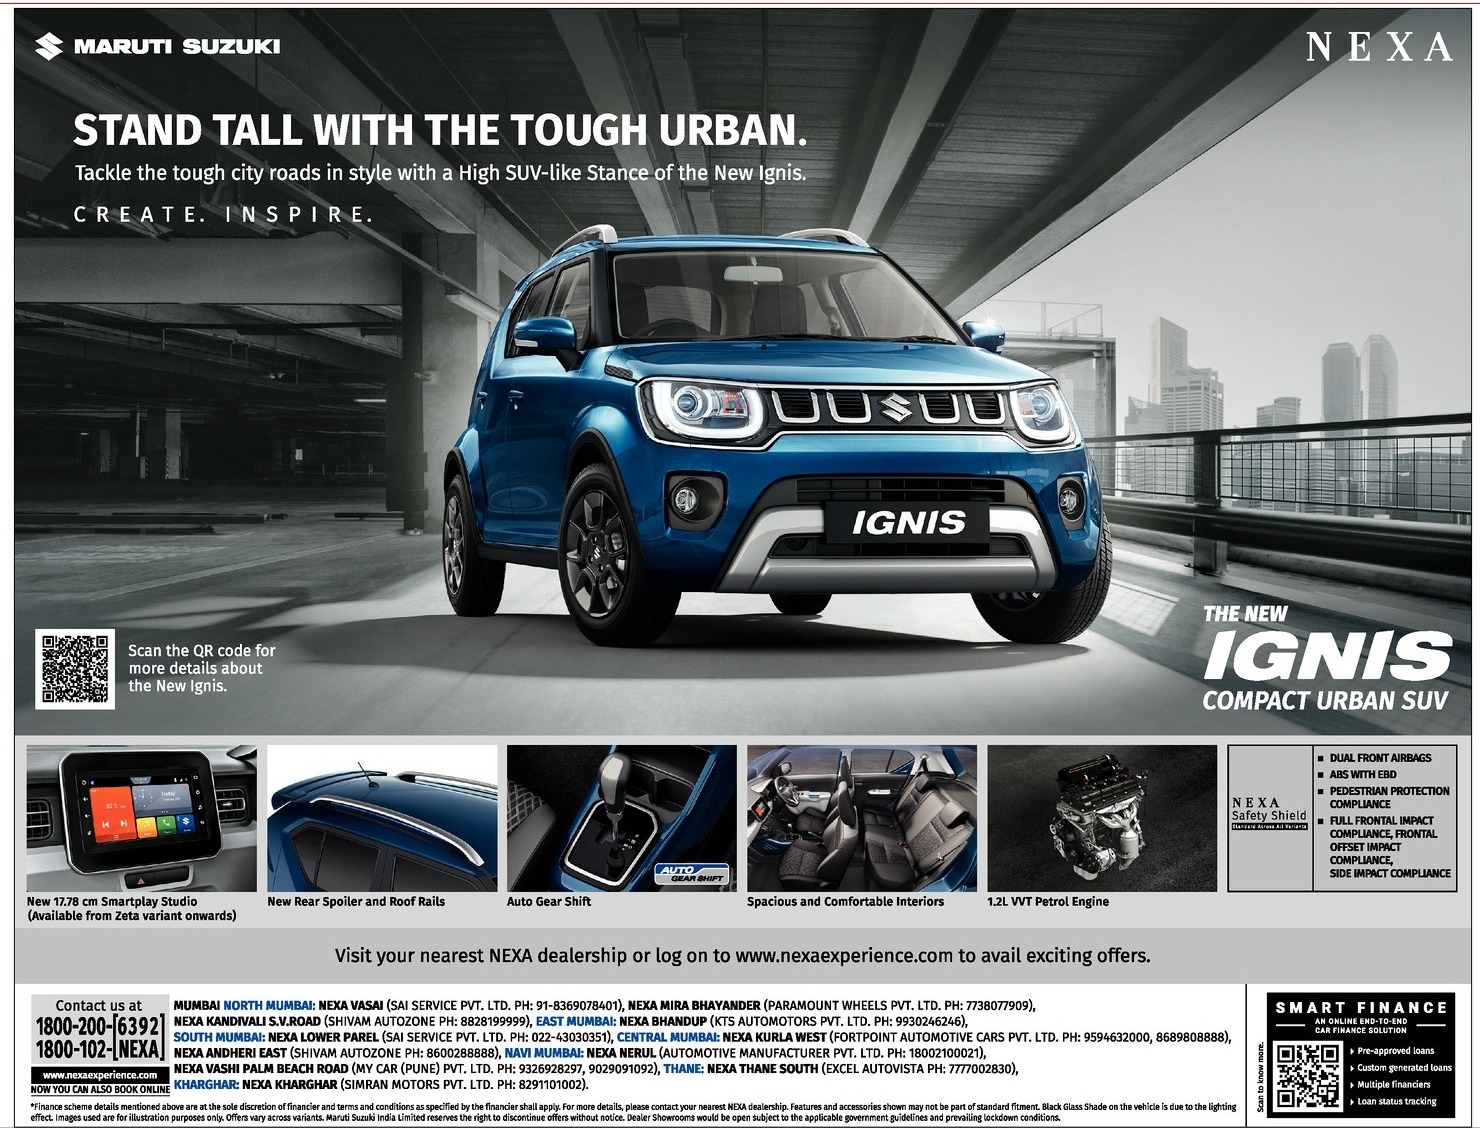 Maruti Suzuki The New Ignis Compact Urban Suv Stand Tall With The Tough  Urban Ad - Advert Gallery